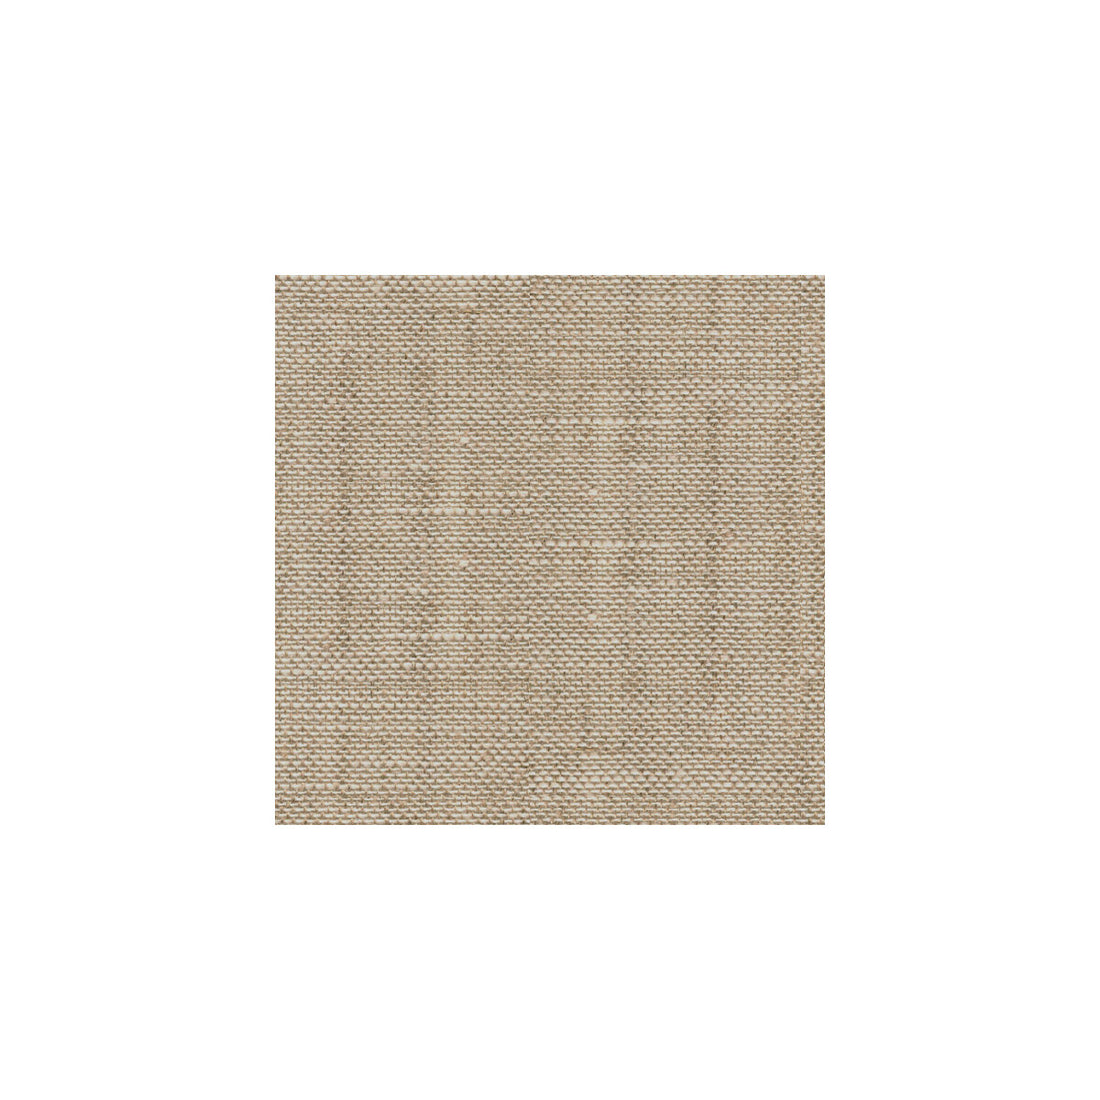 Lynette fabric in natural color - pattern 8014135.1116.0 - by Brunschwig &amp; Fils